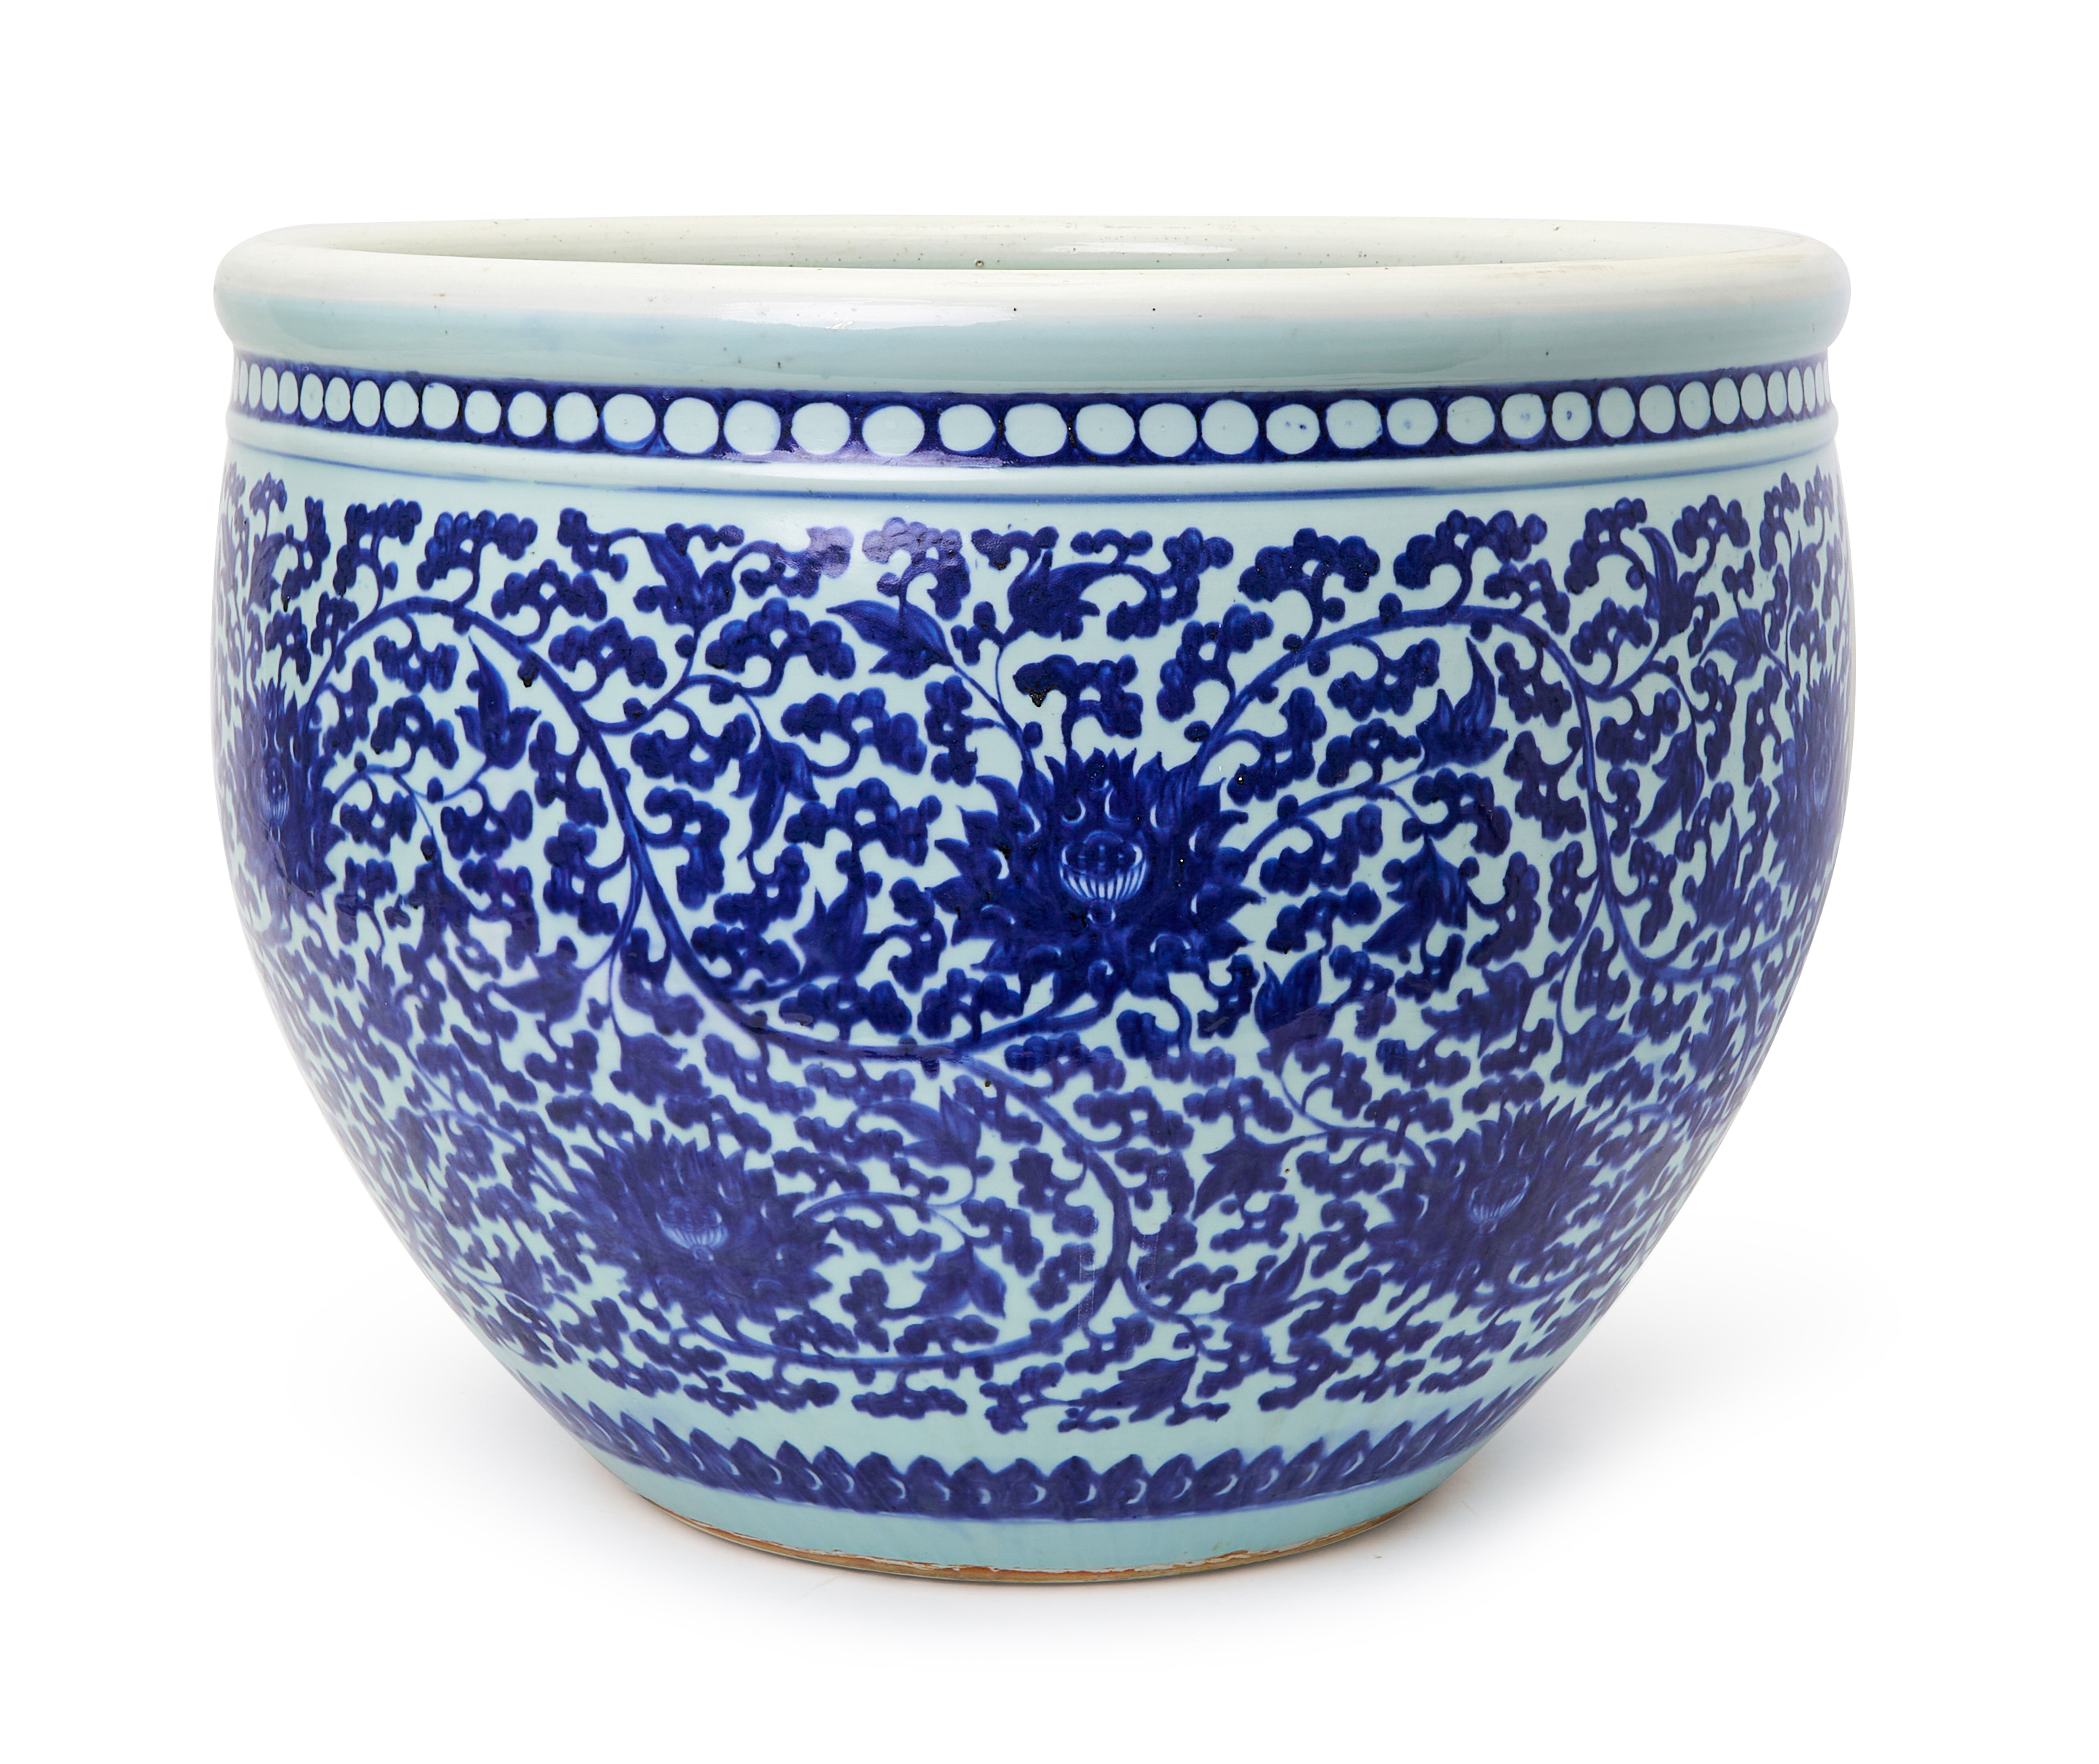 A MONUMENTAL BLUE AND WHITE "LOTUS" FISH BOWL, QIANLONG PERIOD (1736-1795) 18TH CENTURY - Image 3 of 8